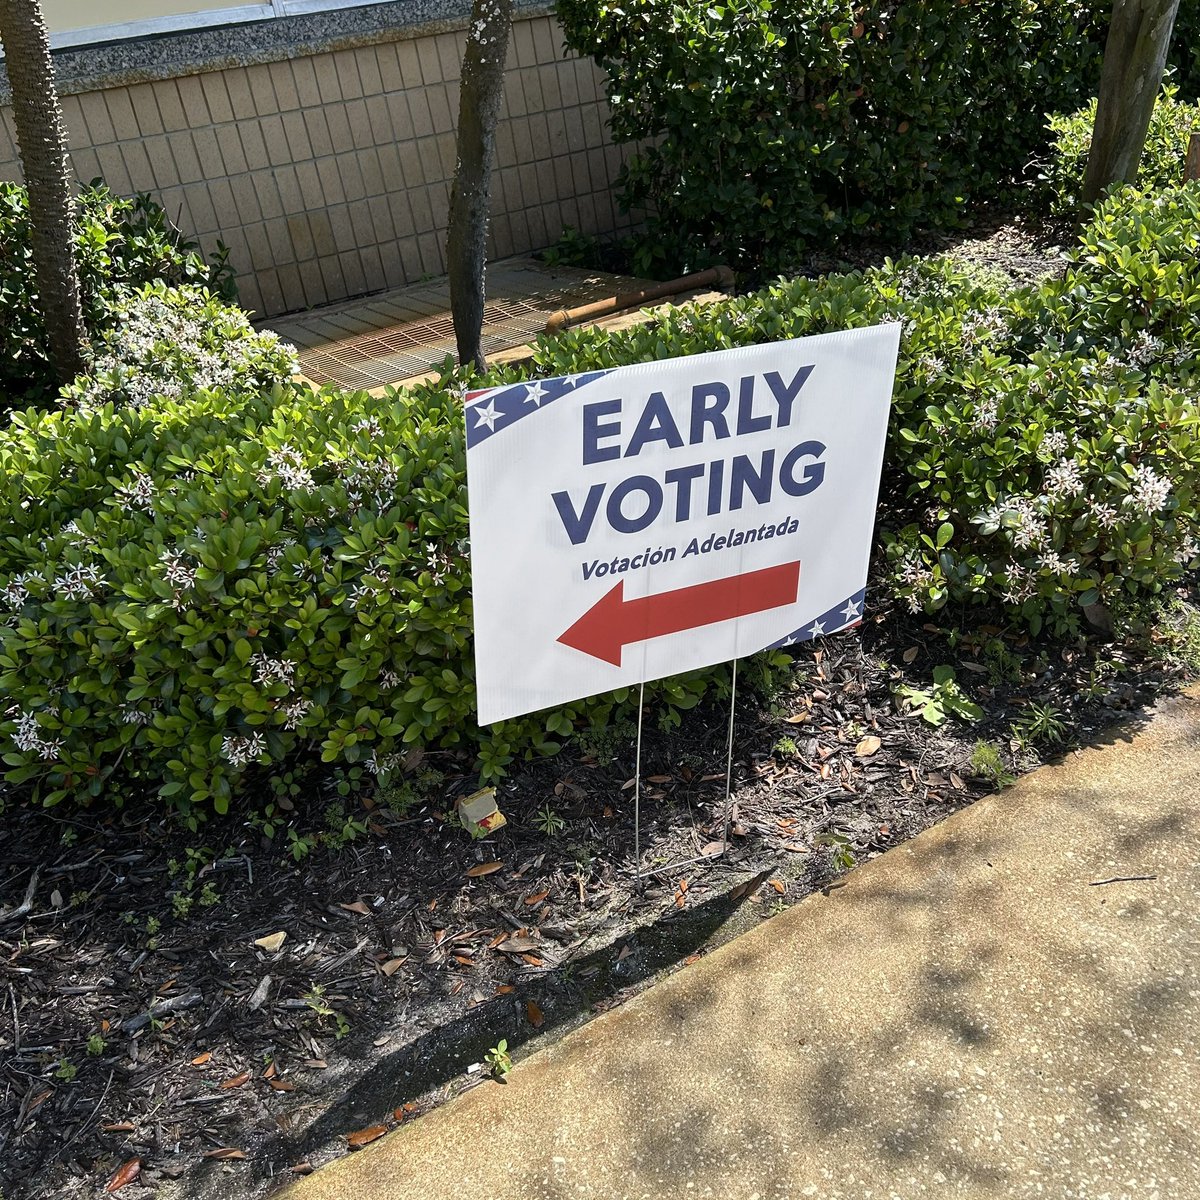 🗳️☑️🇺🇸Don’t forget municipal elections are this Tuesday, March 19. You can vote early until Sunday, March 17. For more election information go to votepinellas.gov 🗳️☑️🇺🇸
#stacygeier
#vote #pinellas #fl #florida #august #election #pinellascountyfl #conservative #values